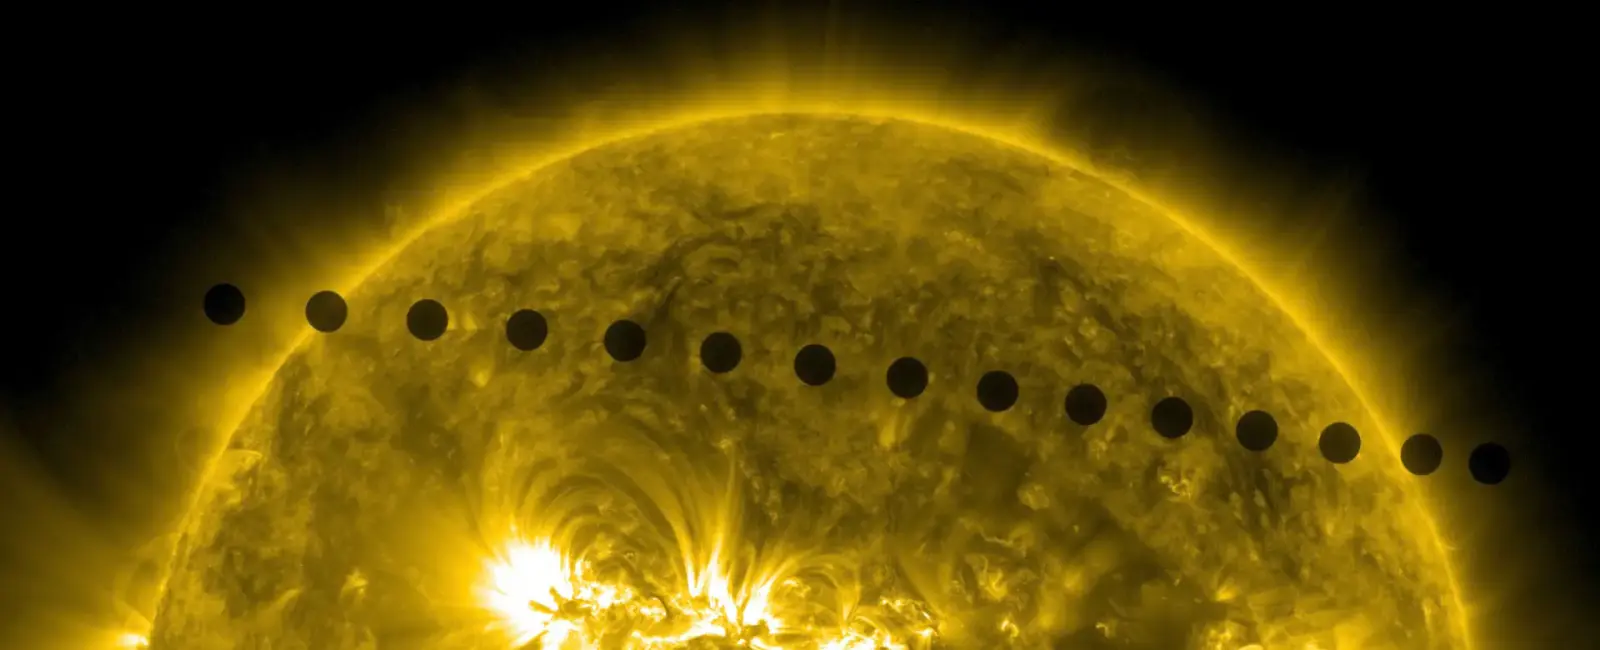 Venus is a rare planet in that it can sometimes be seen from earth passing across the face of the sun this is called a transit transits occurred in 1631 1639 1761 1769 1874 1882 8 june 2004 6 june 2012 and the next transit will be on 11 december 2117